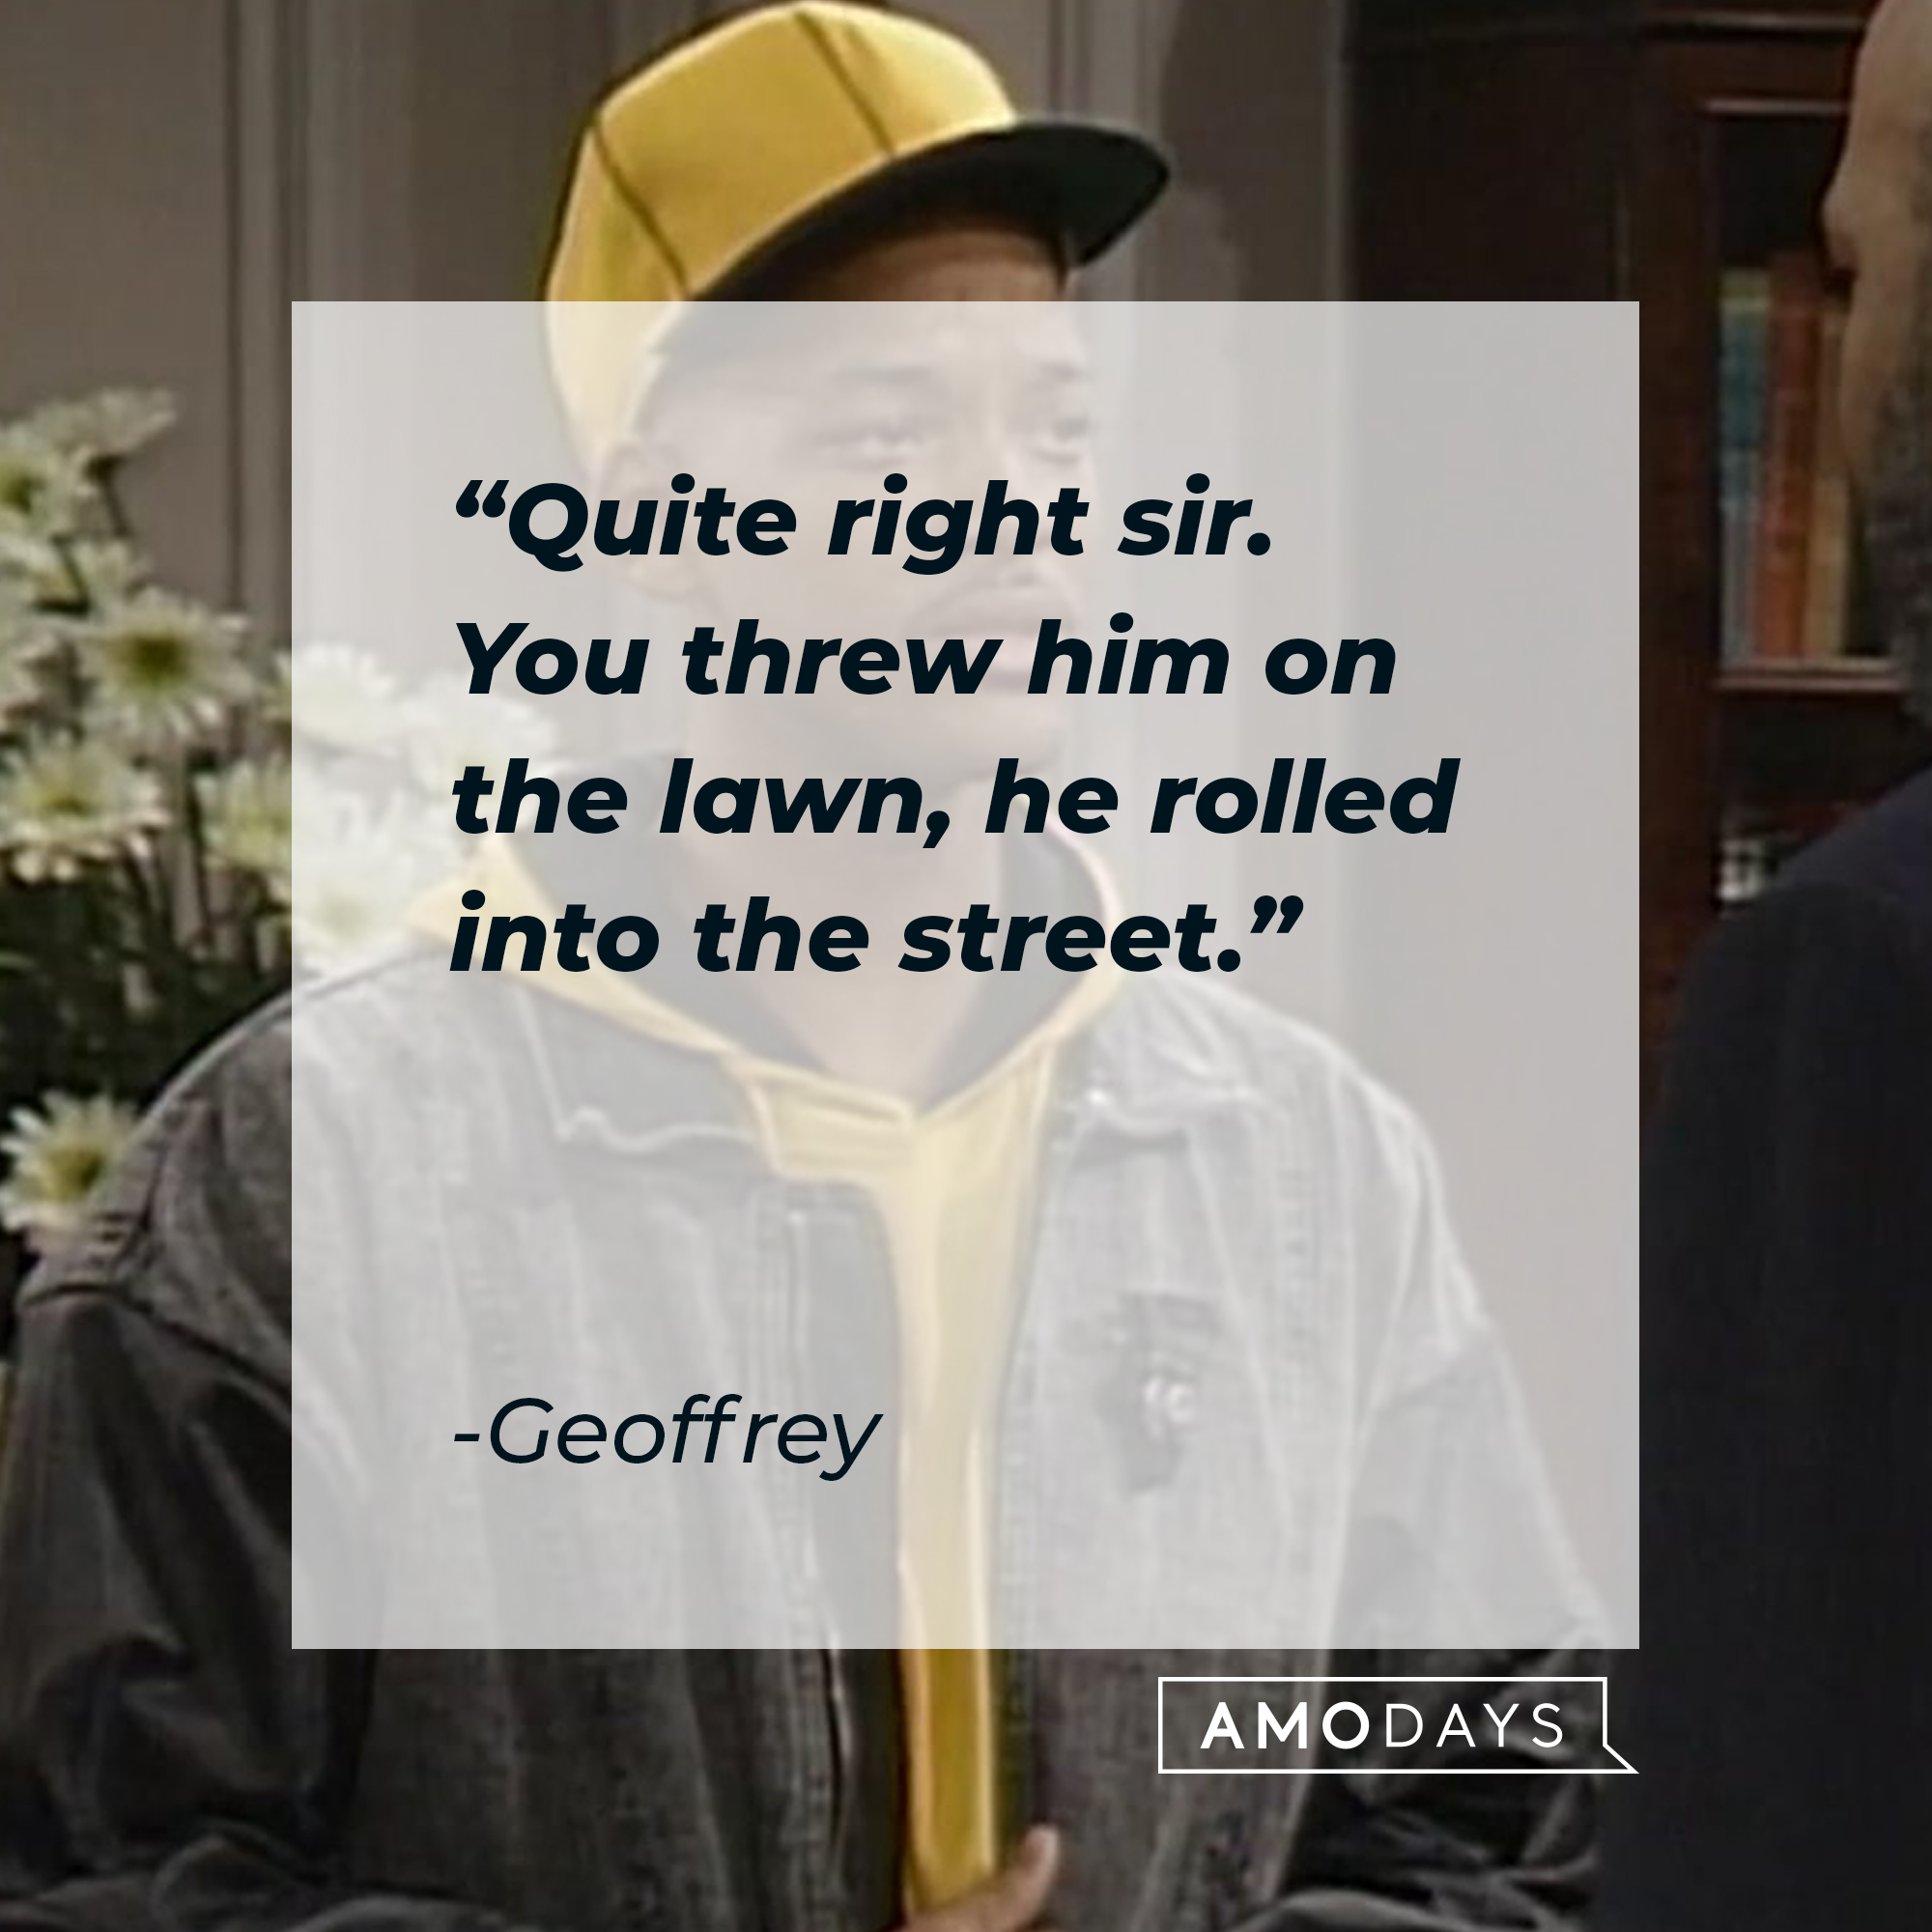 A picture of Will with Geoffrey’s quote: "Quite right sir. You threw him on the lawn, he rolled into the street.” | Source: facebook.com/TheFreshPrinceofBelAir